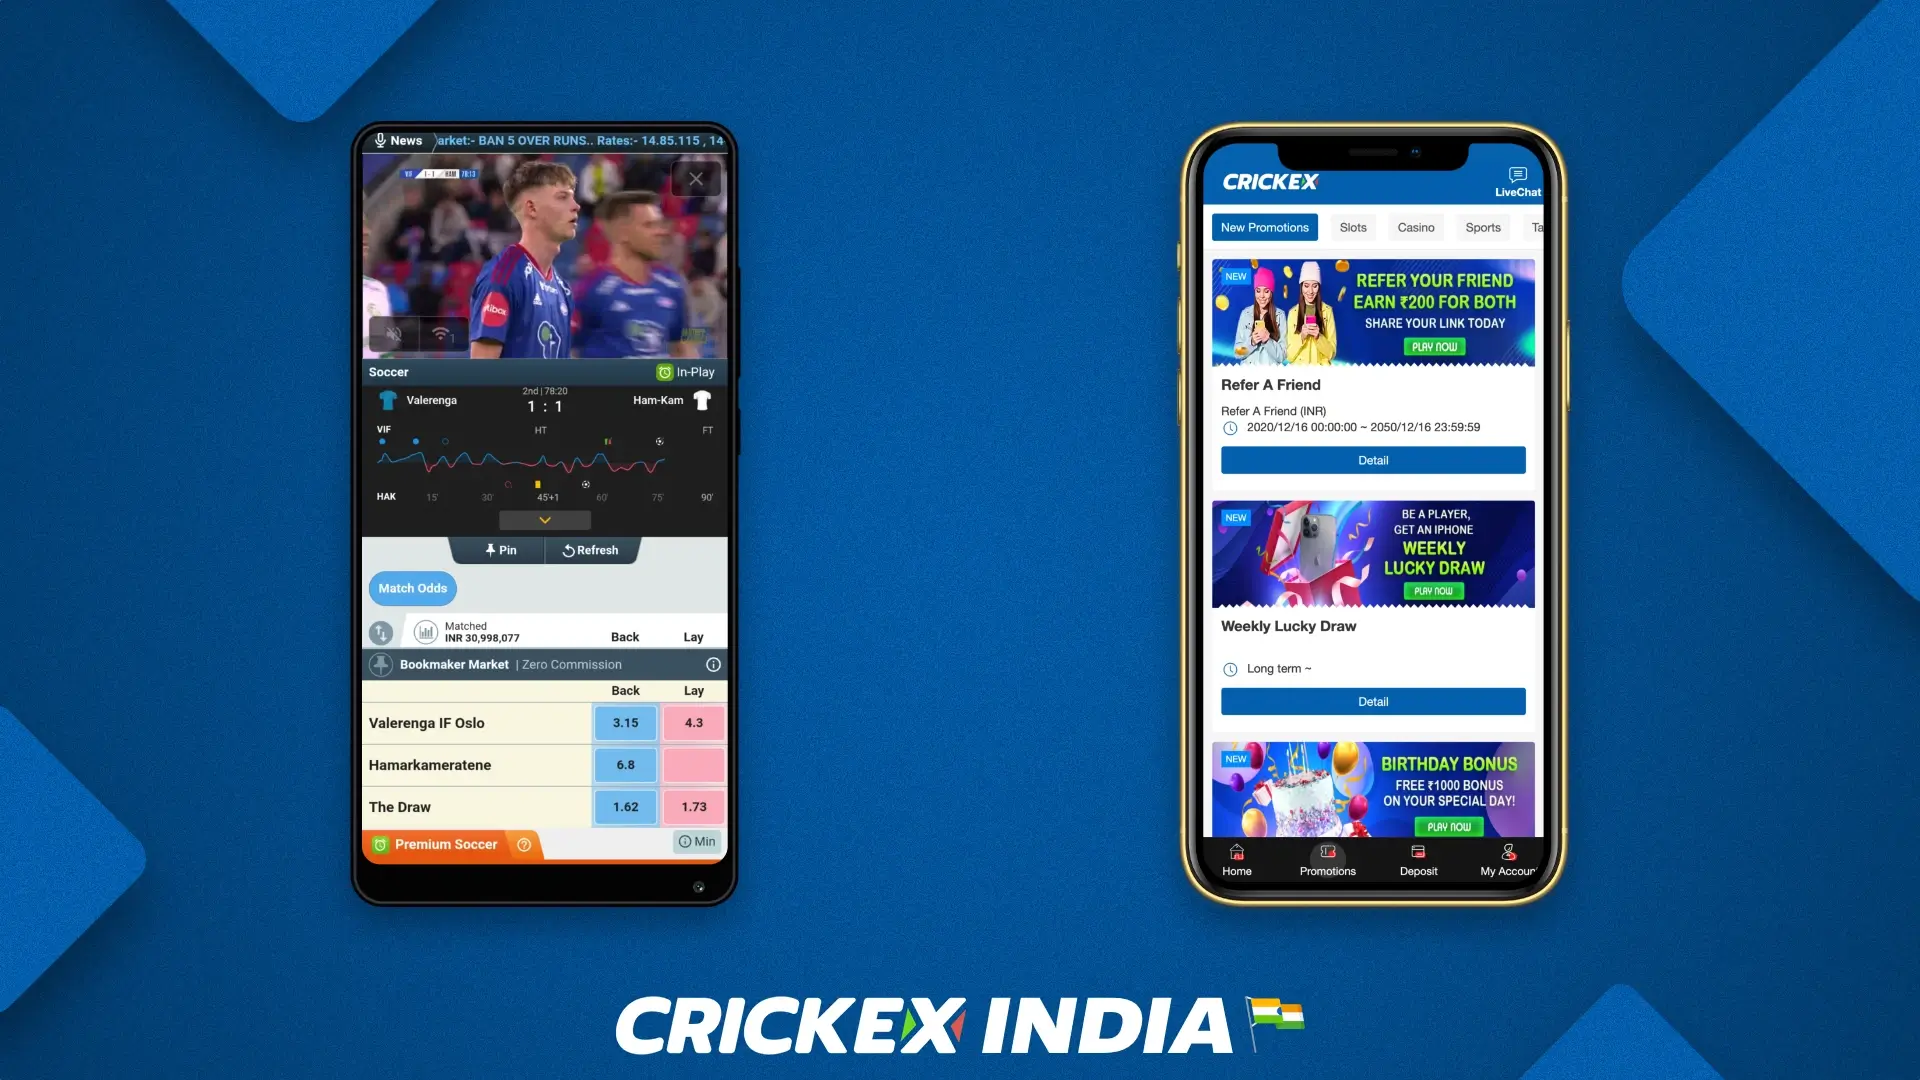 The main features and benefits of using the Crickex mobile app